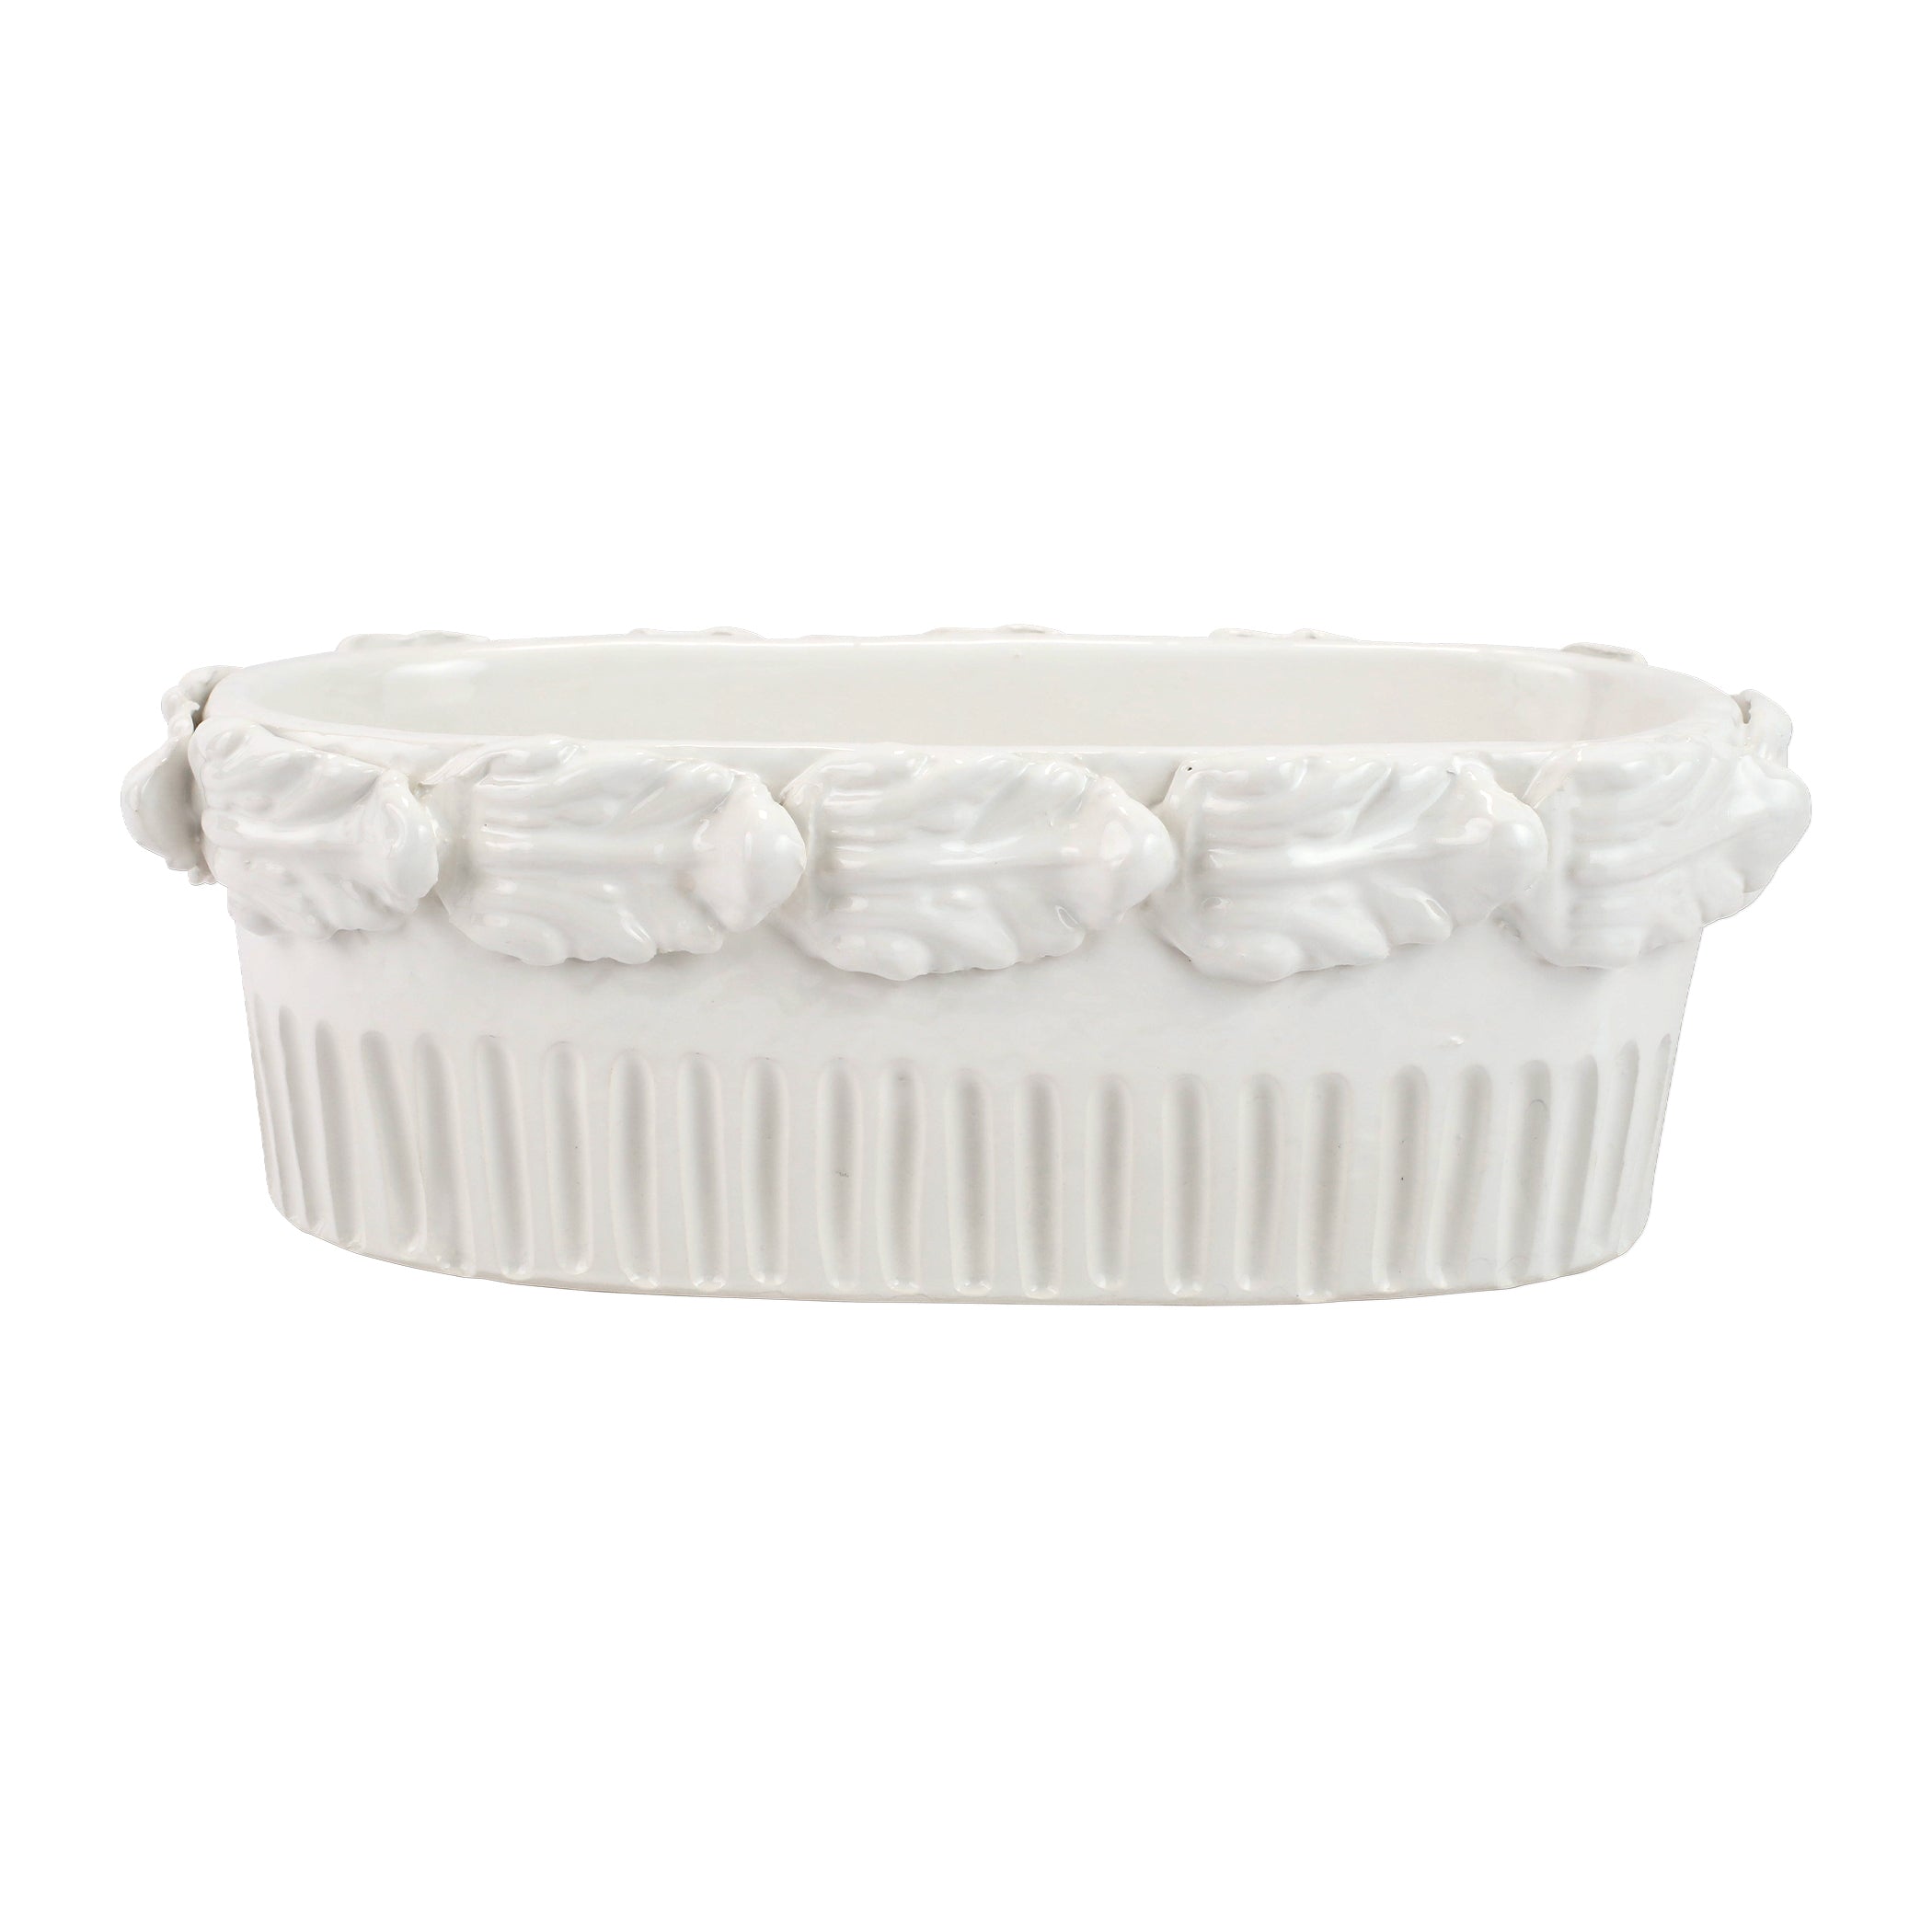 Rustic Garden White Acanthus Leaf Oval Planter